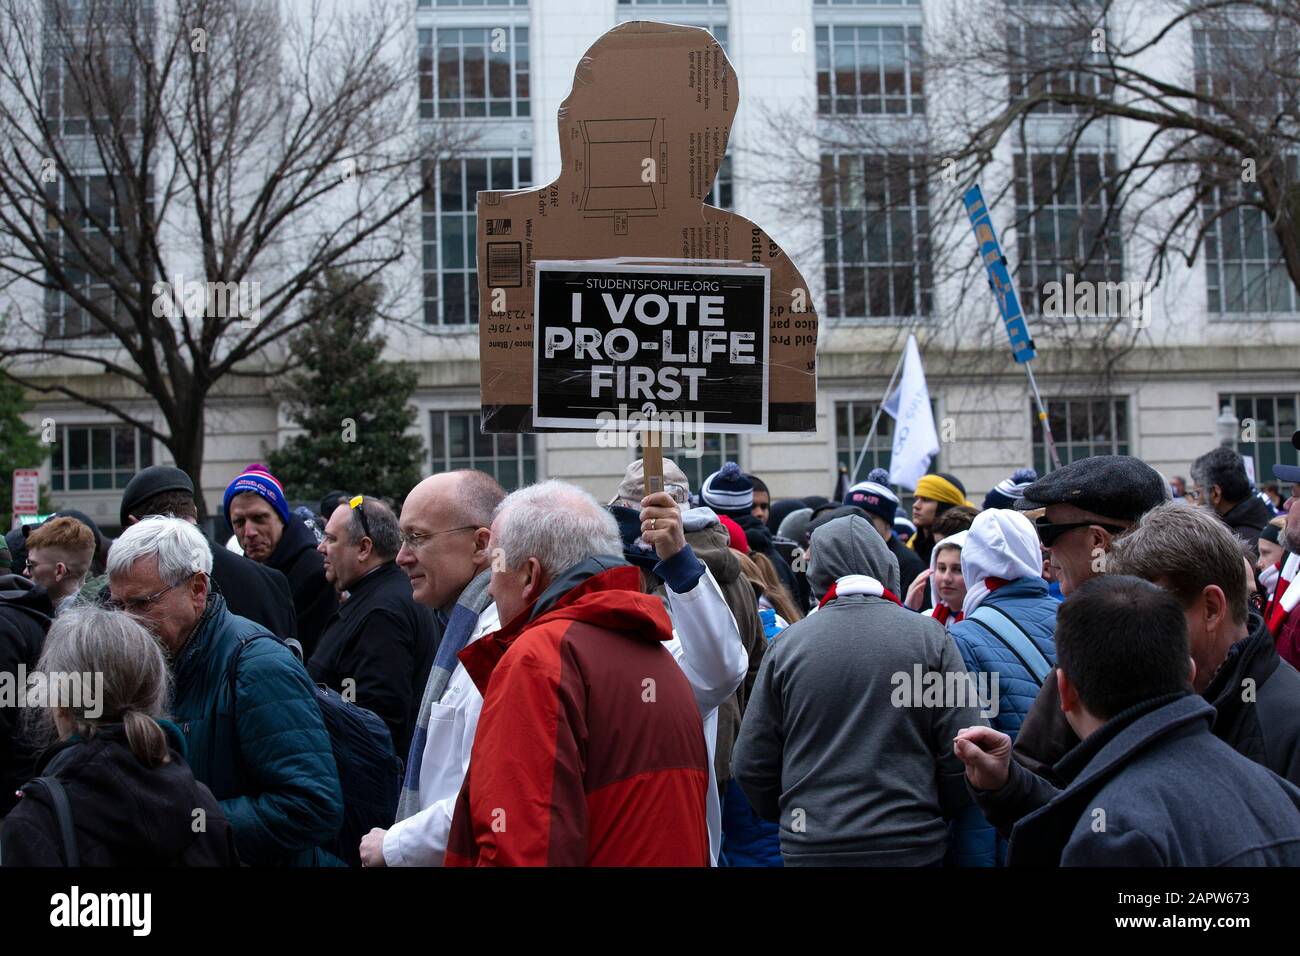 Washington DC, USA. 24th Jan, 2020. People gather for the March for Life on the National Mall in Washington, DC, U.S., on Friday, January 24, 2020. Credit: MediaPunch Inc/Alamy Live News Stock Photo